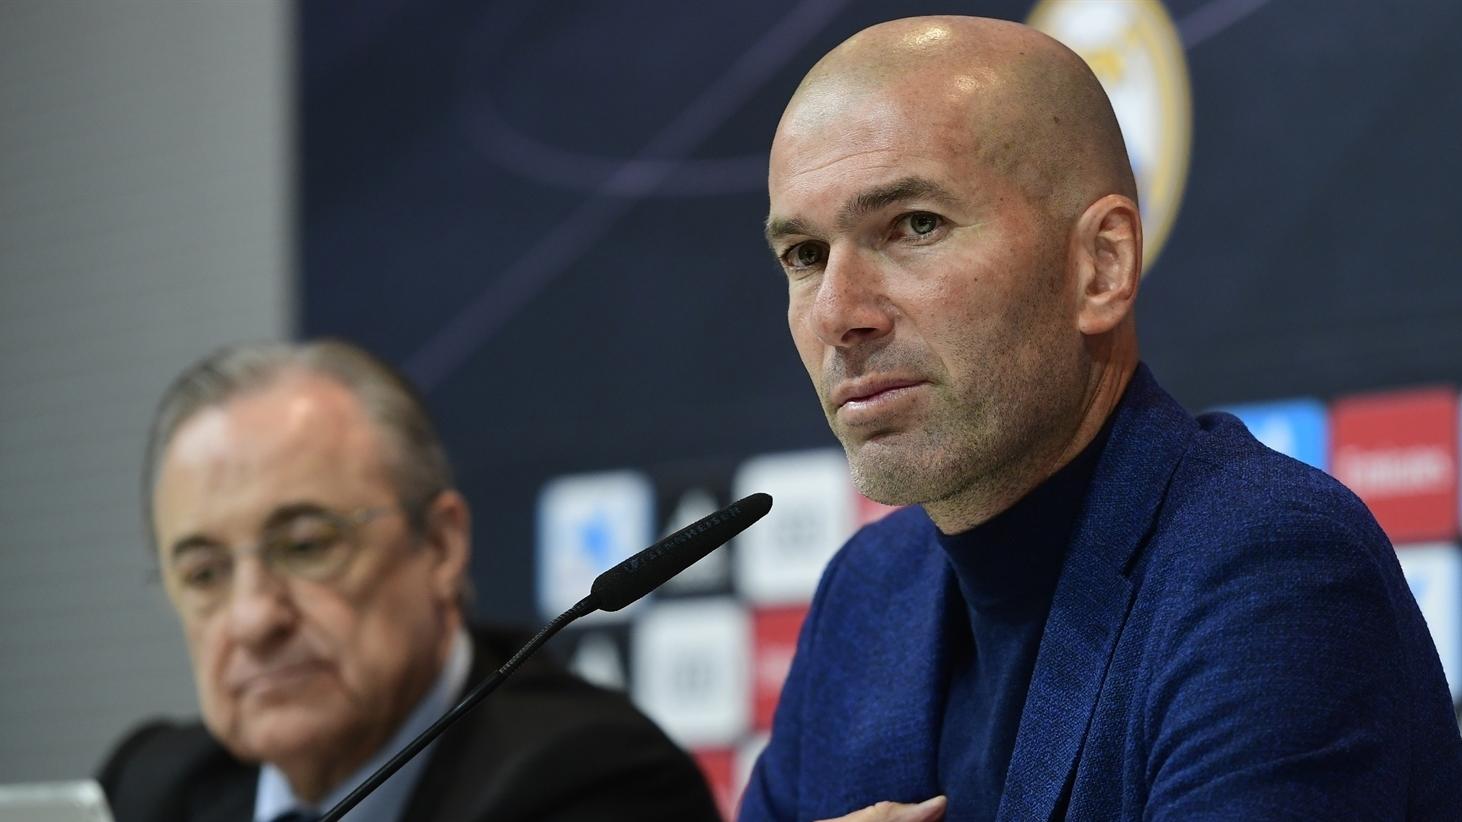         The reasons why Zinedine Zidane is unlikely to lead Manchester United have been given.